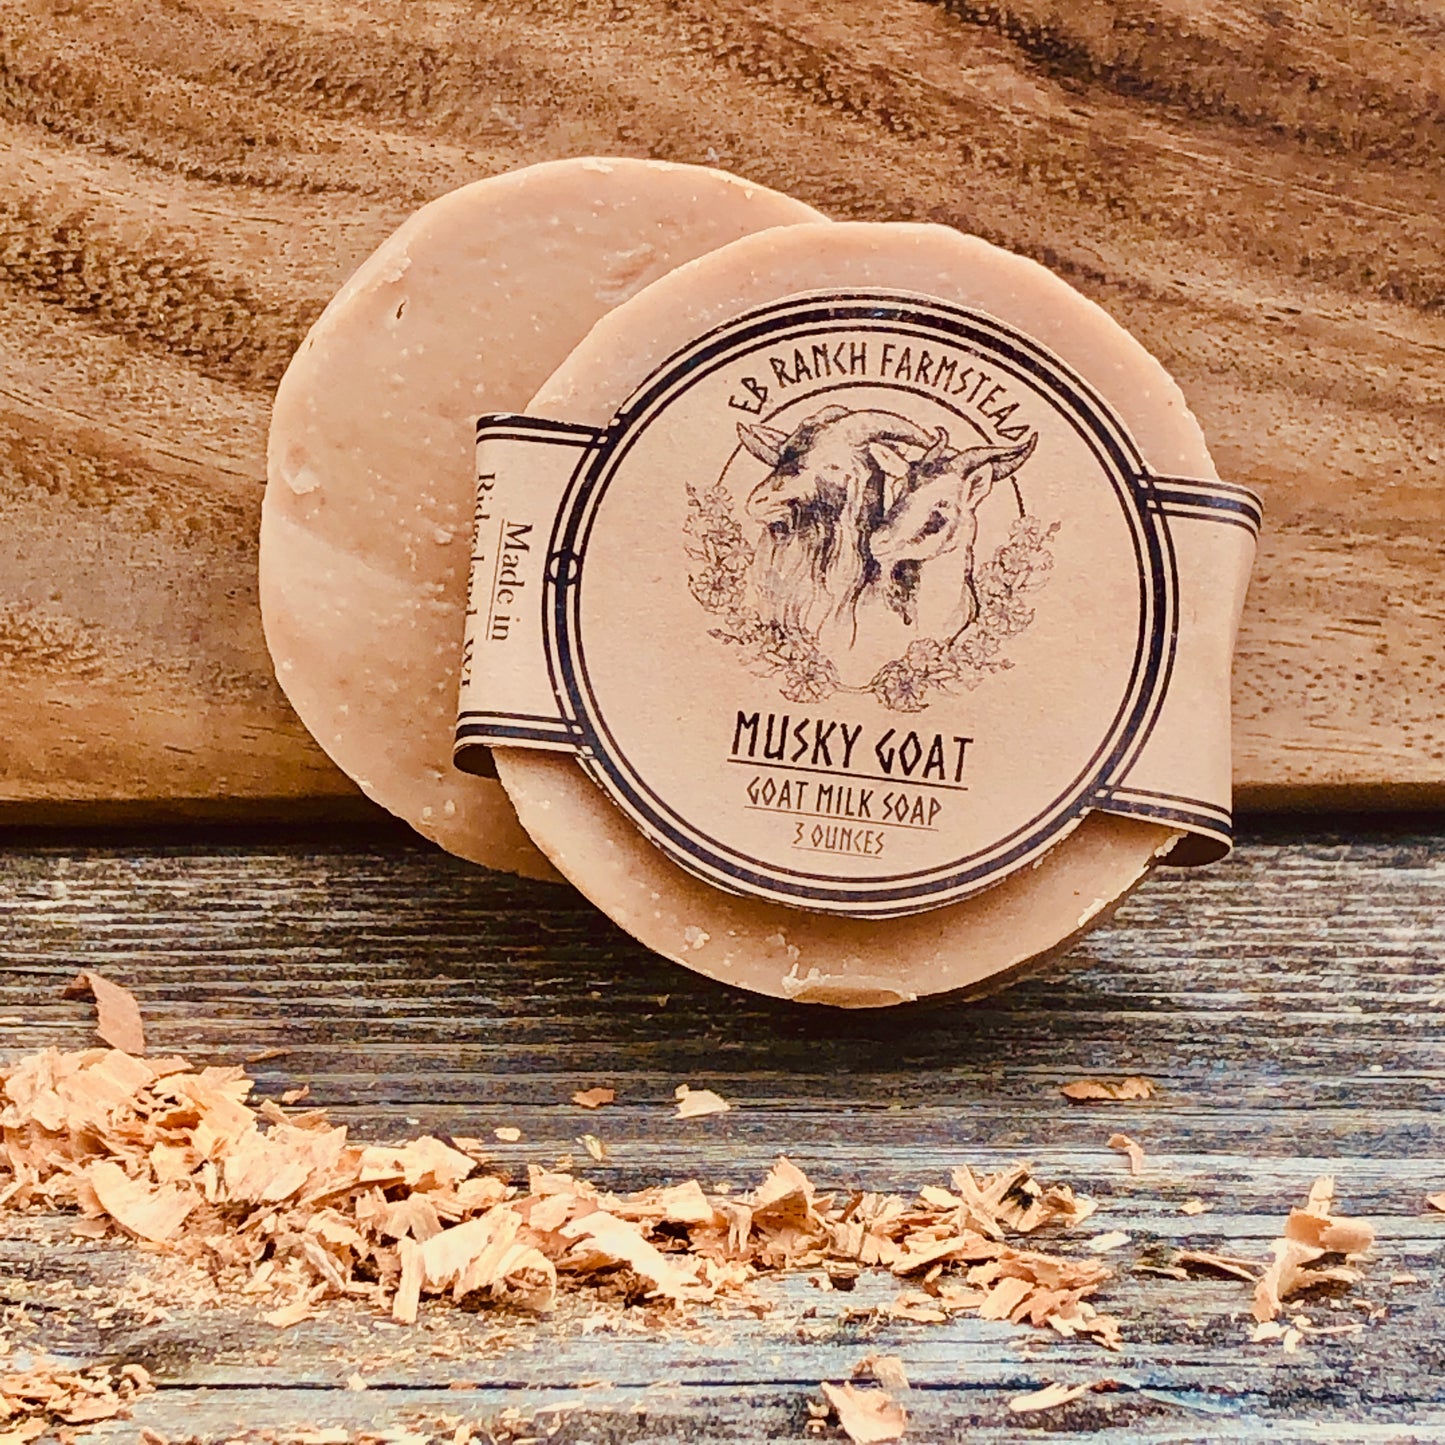 Bar of Wild Haven Farm's Musky Goat goat milk soap made with San Clemente Island goat milk